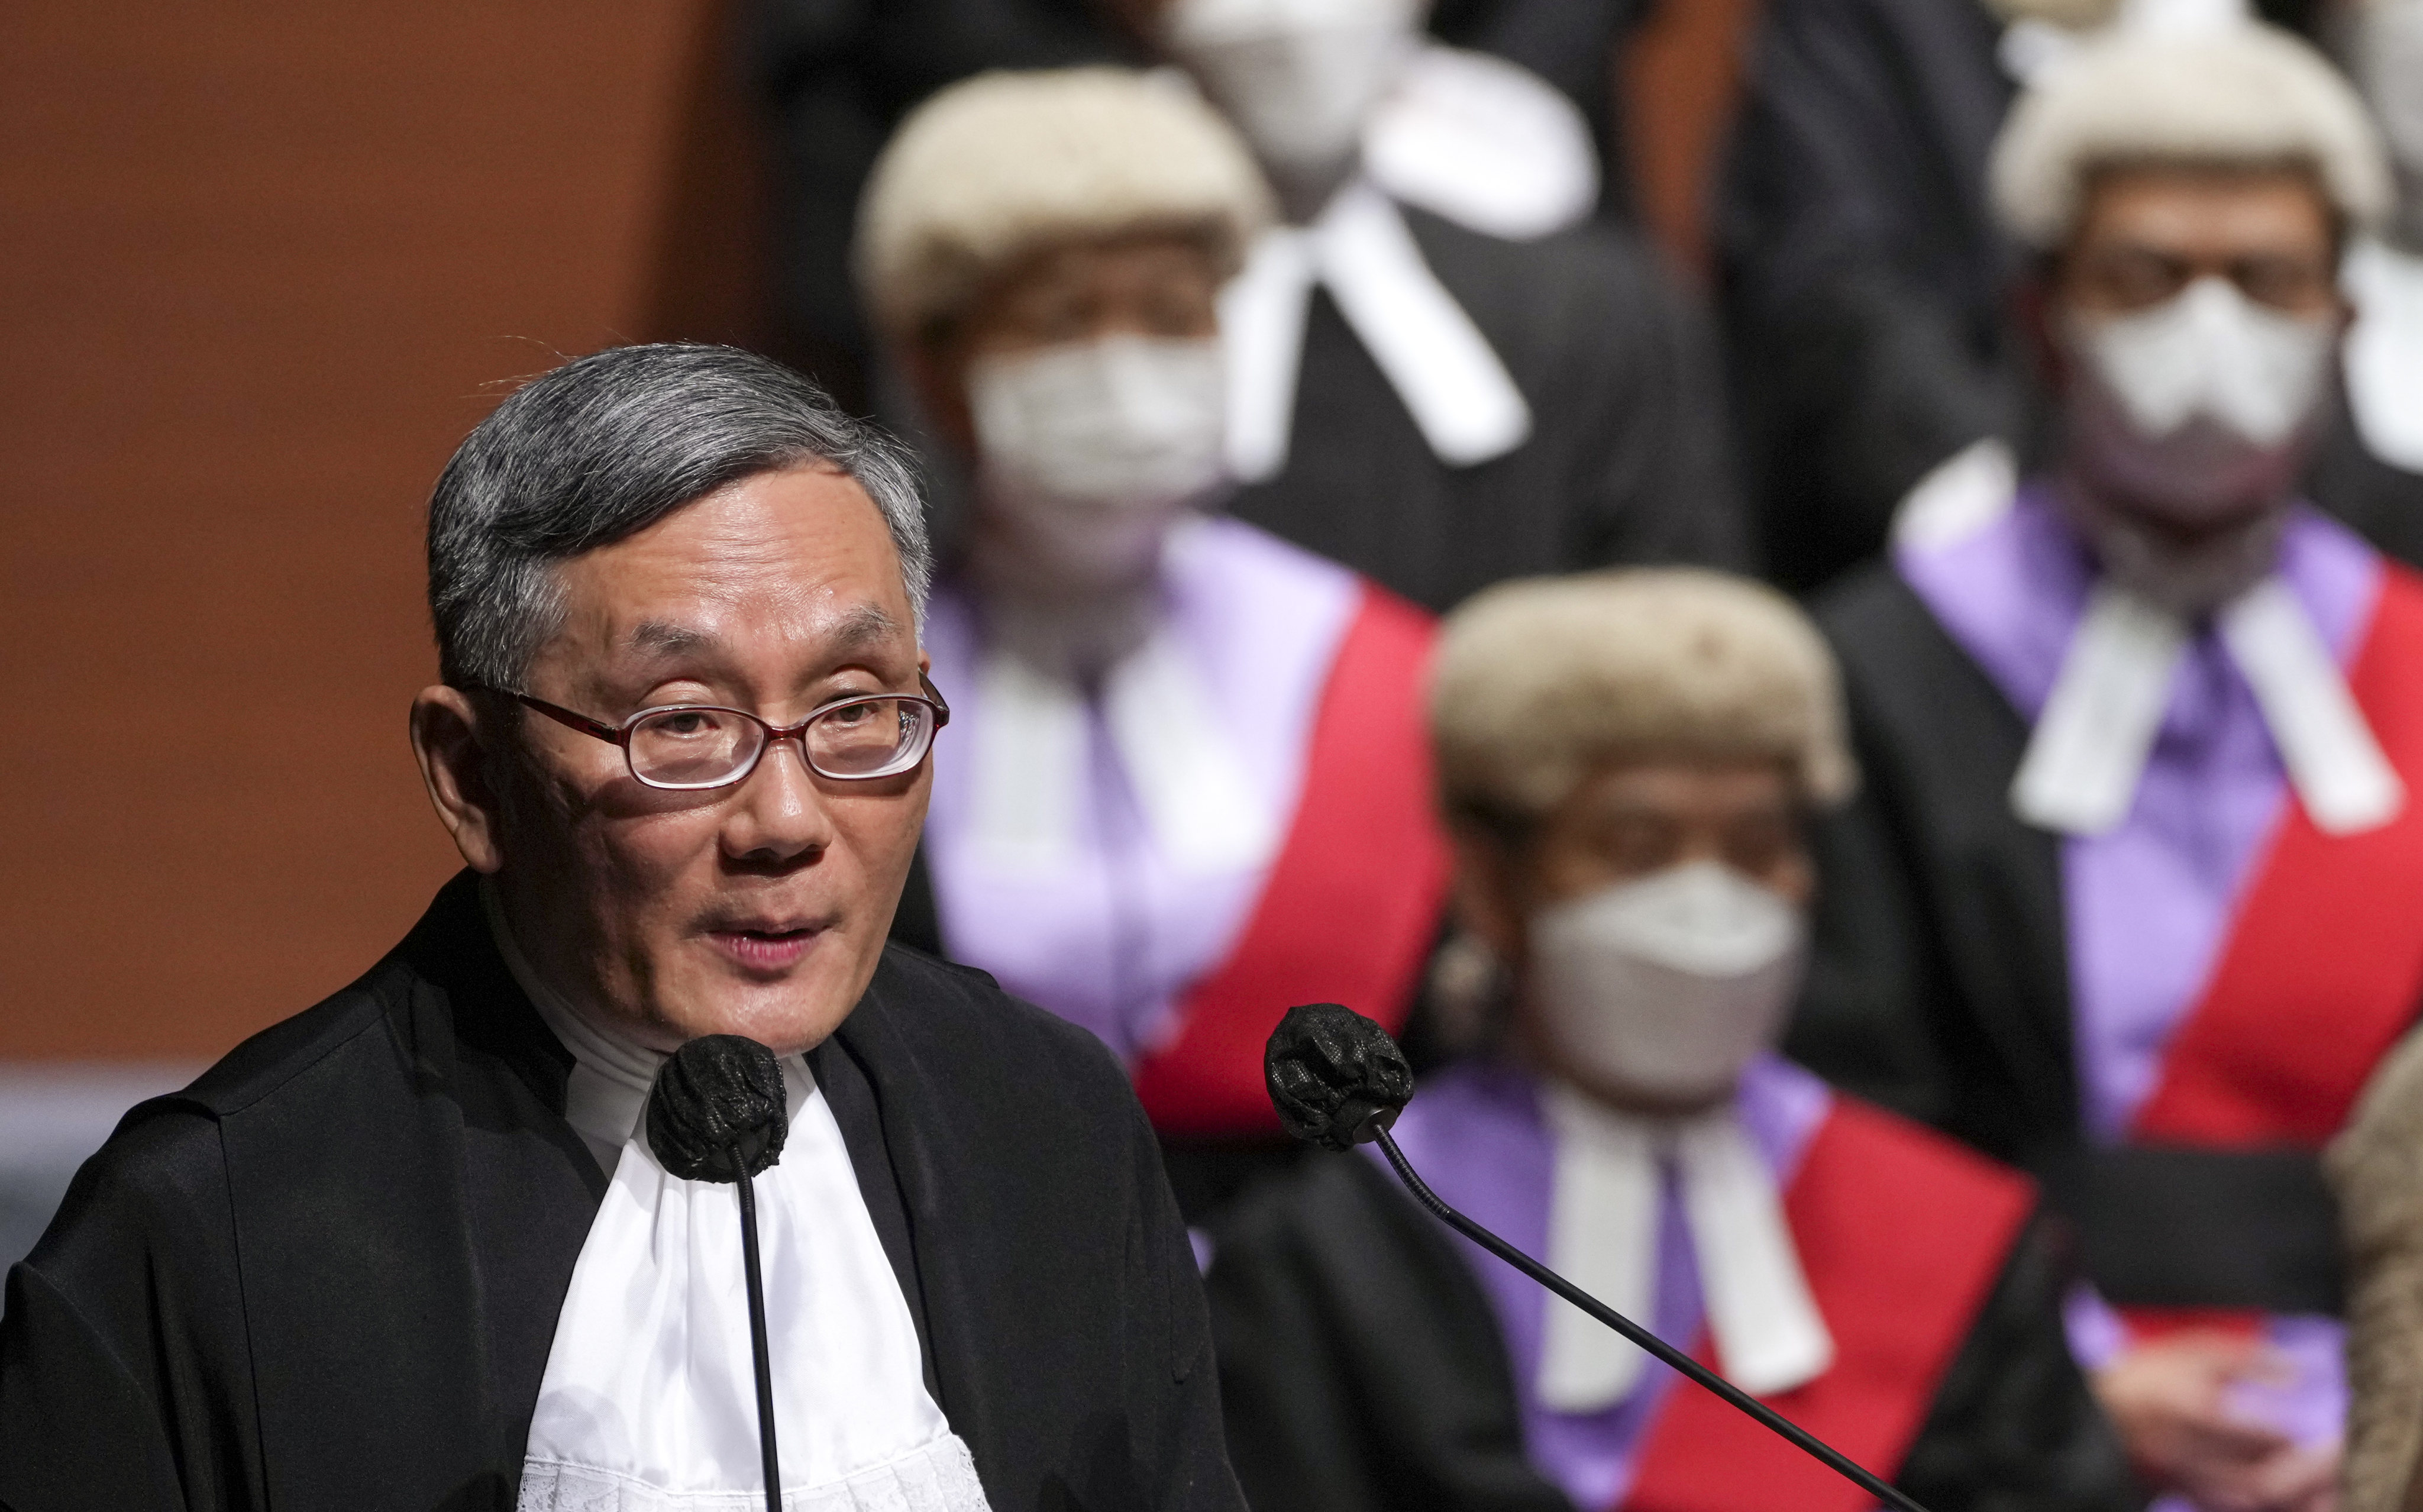 The Chief Justice of the Court of Final Appeal, Andrew Cheung Kui-nung,   urged all lawyers to “stand up against any attempt to interfere with the due administration of justice by our judges”. Photo: SCMP / Sam Tsang